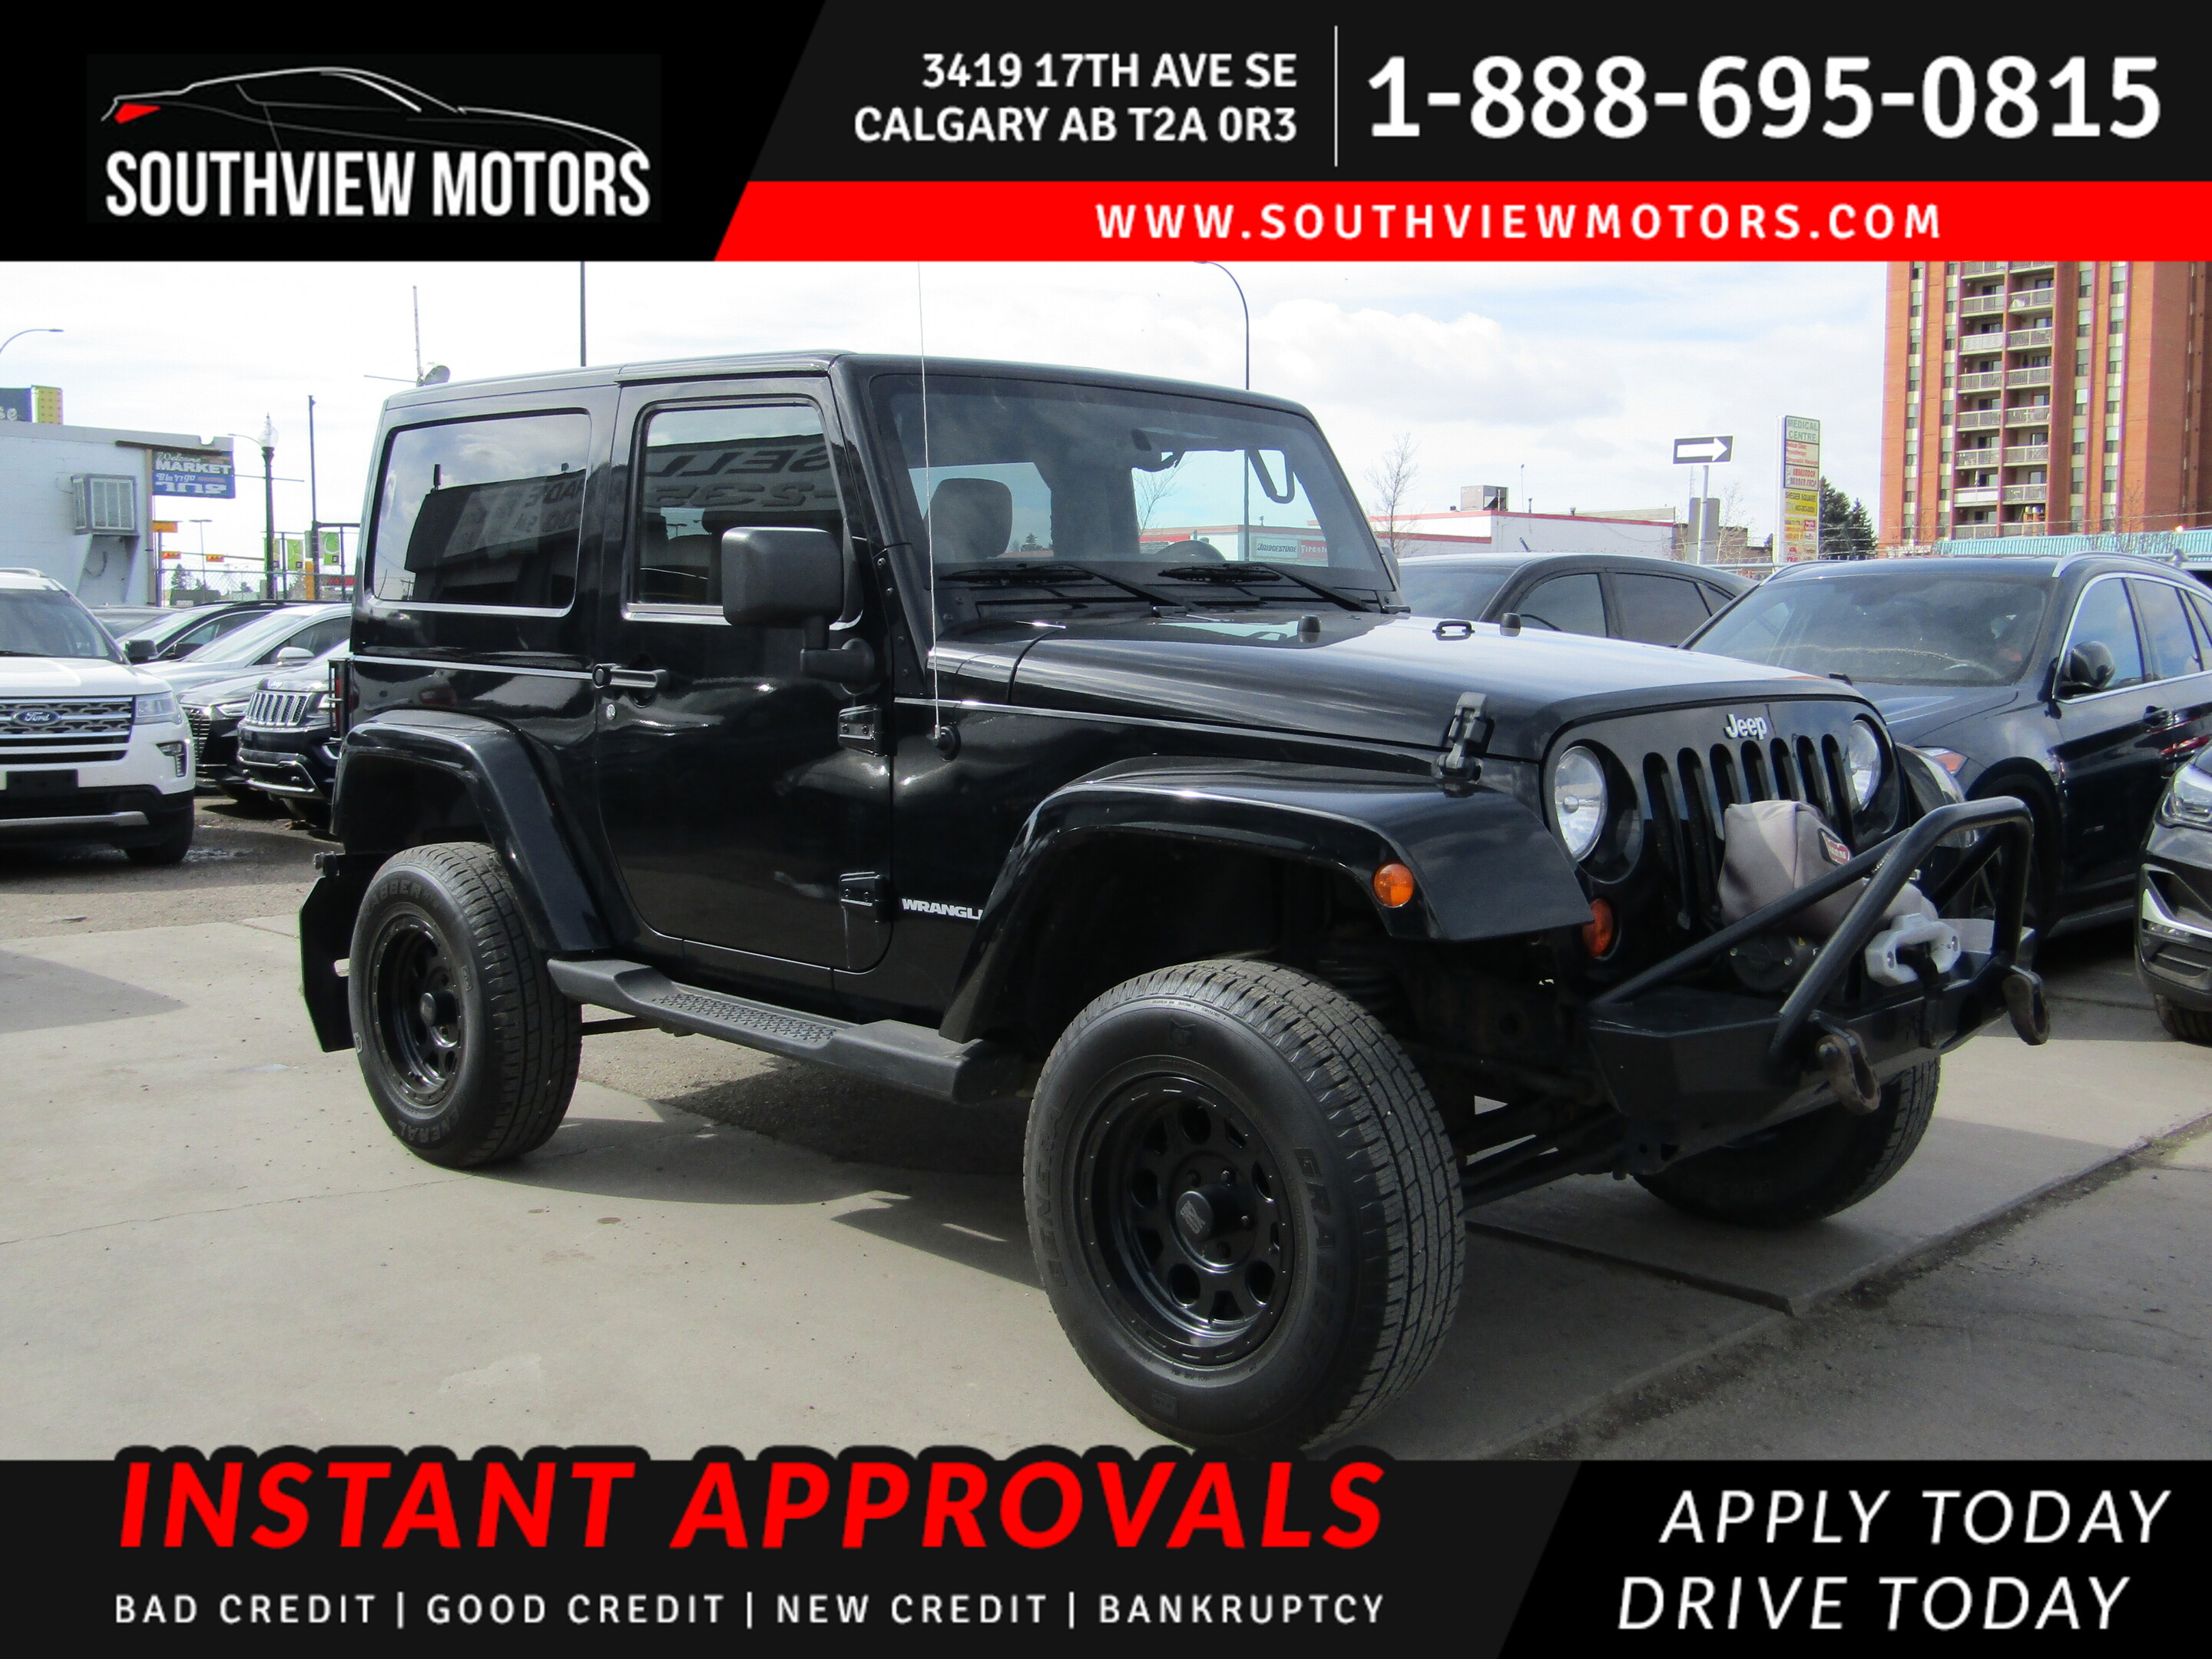 2011 Jeep Wrangler SPORT 4WD 6-SPEED MANUAL 3.8L V6 BROWN LEATHER!